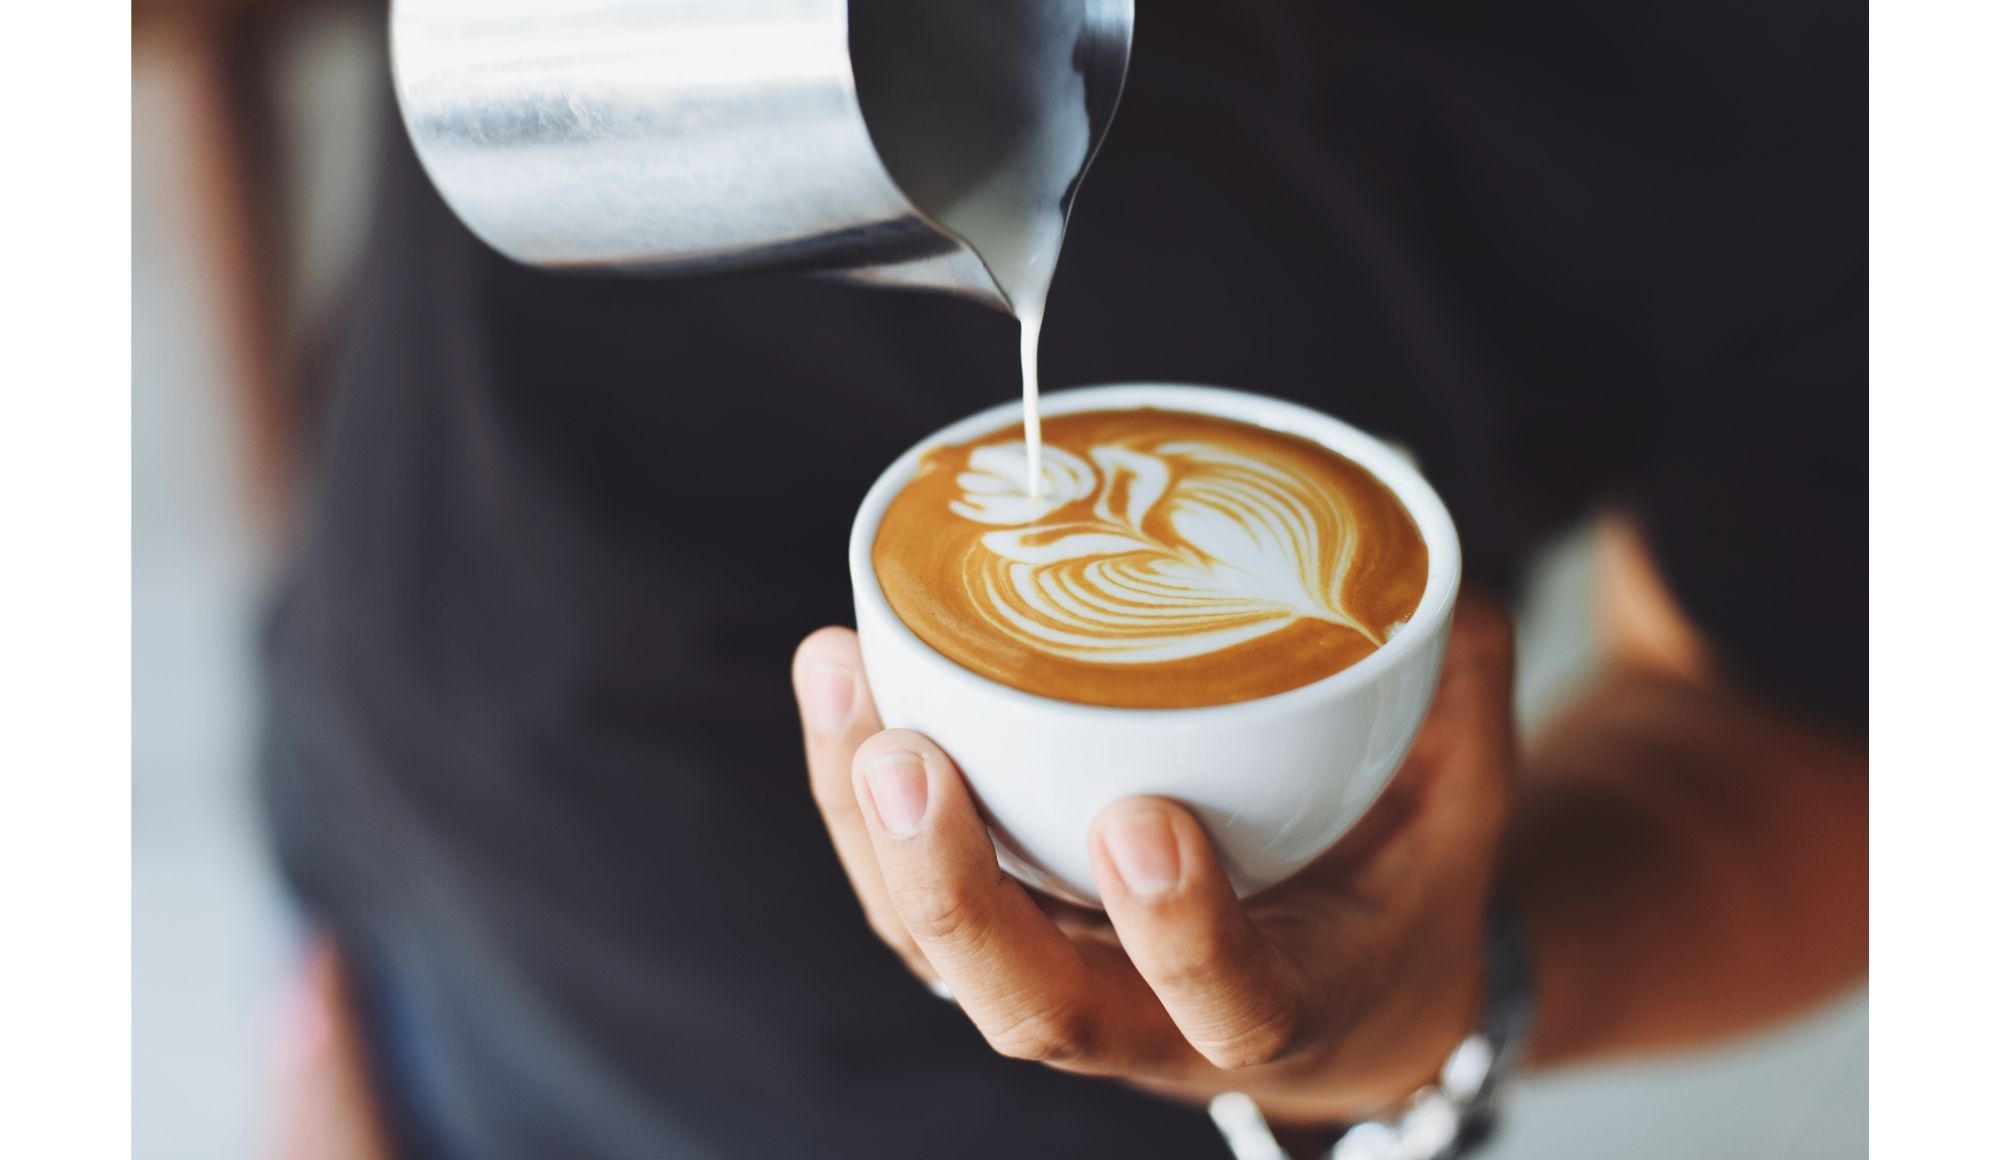 3 Ways This Coffee Stock Could Sizzle